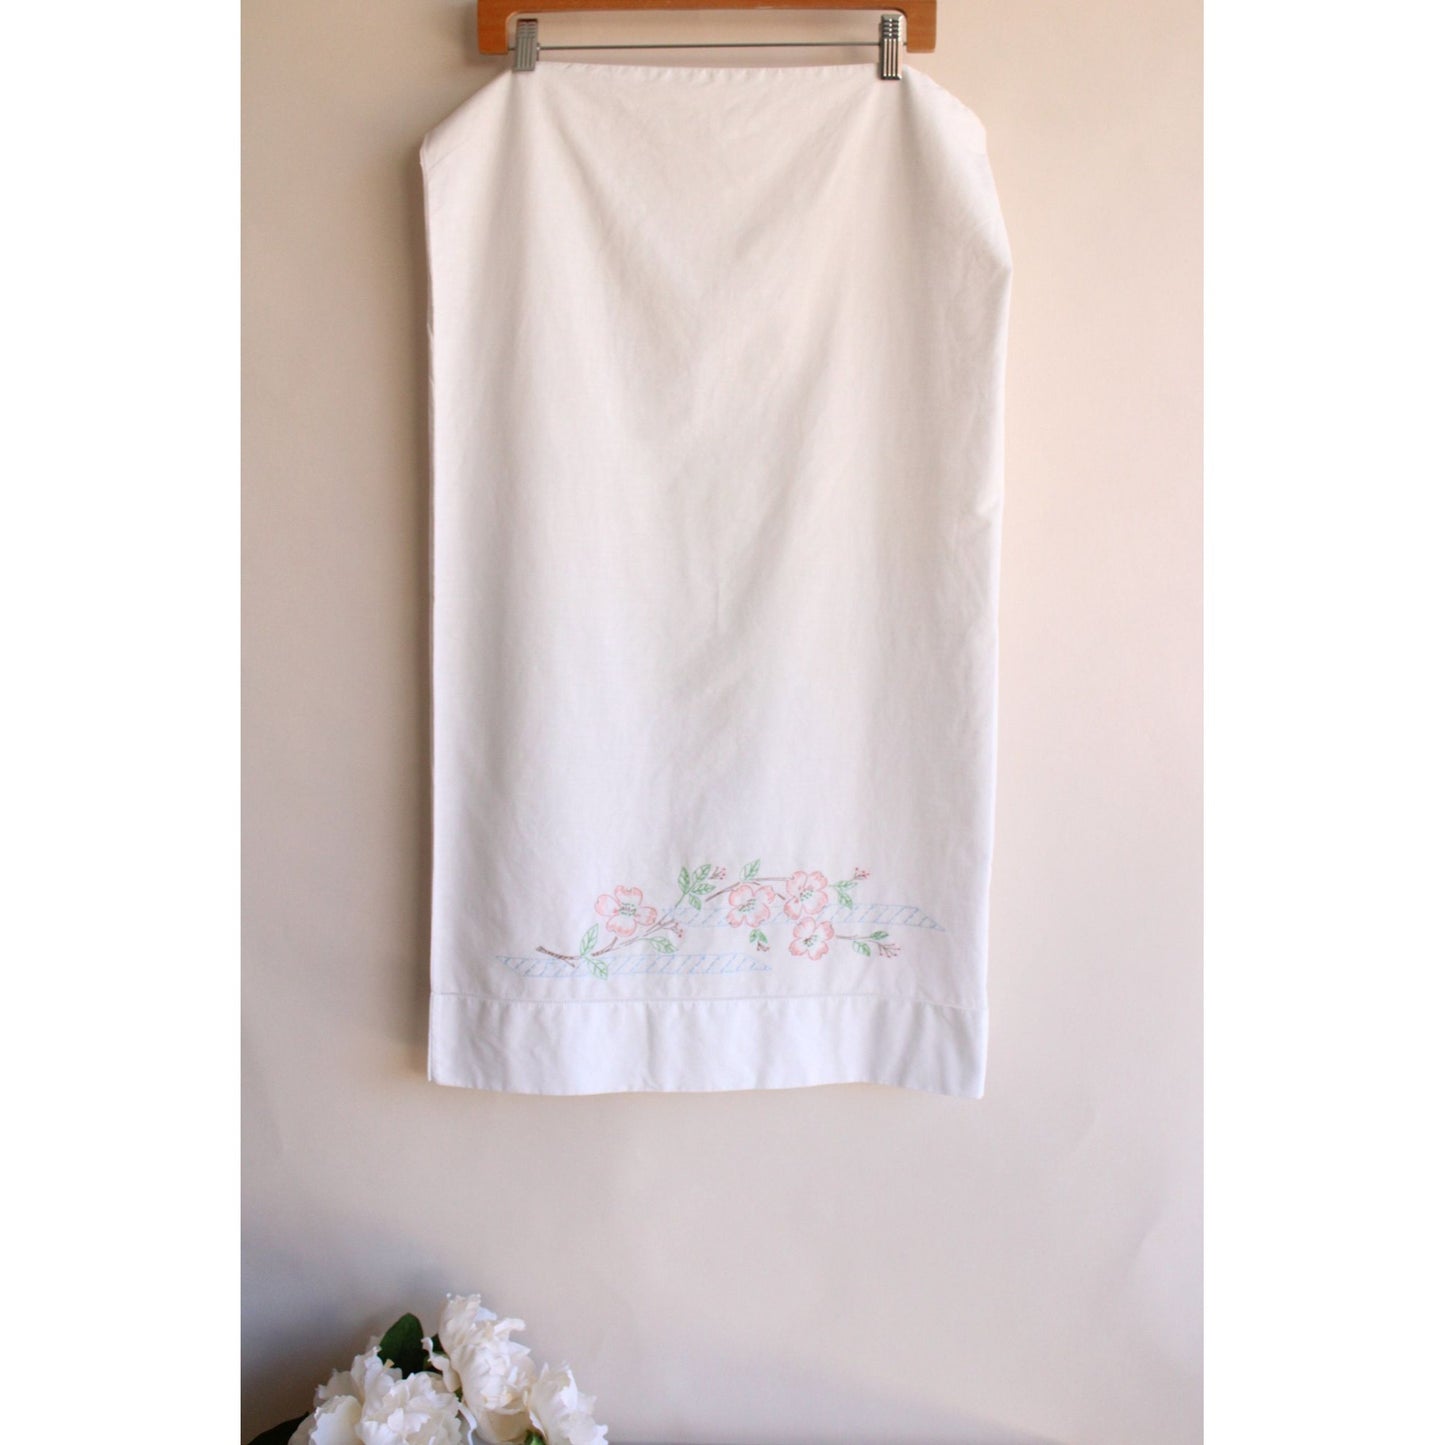 Vintage 1970s 1980s Pillow Case With Embroidered Flowers